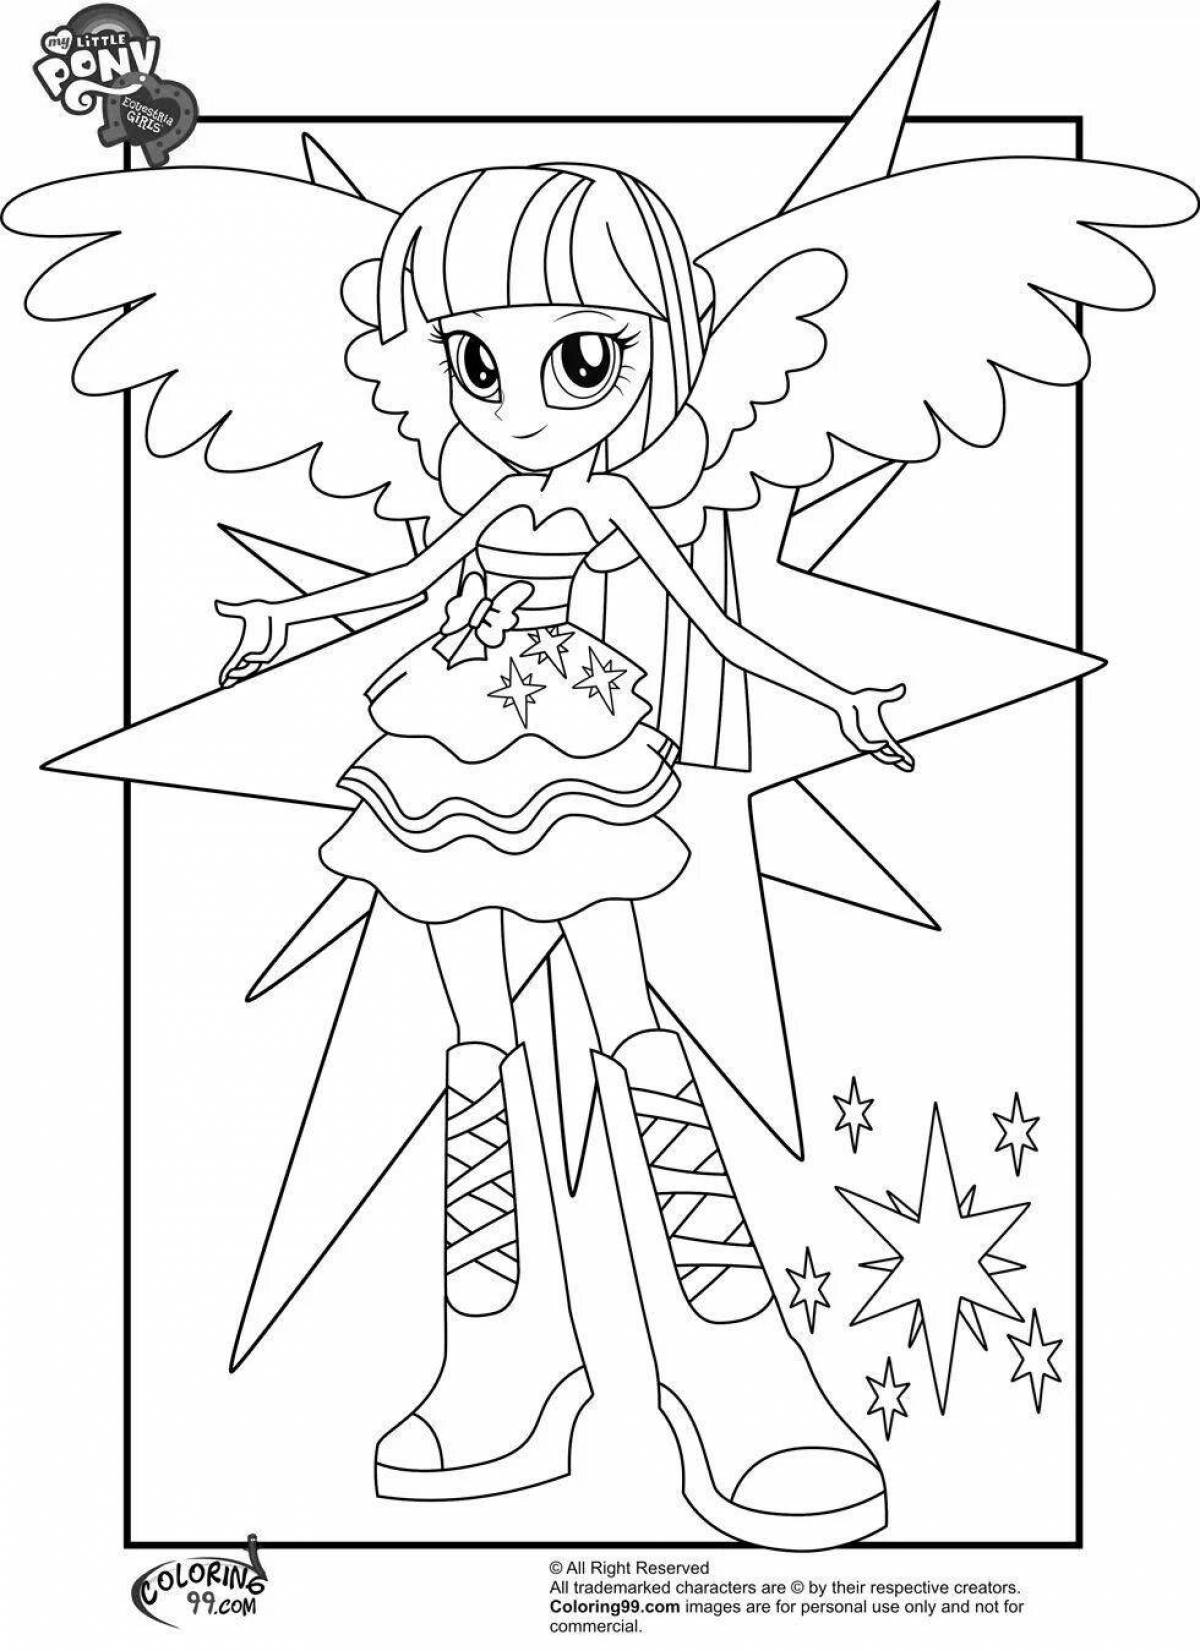 Coloring page holiday equestria girls